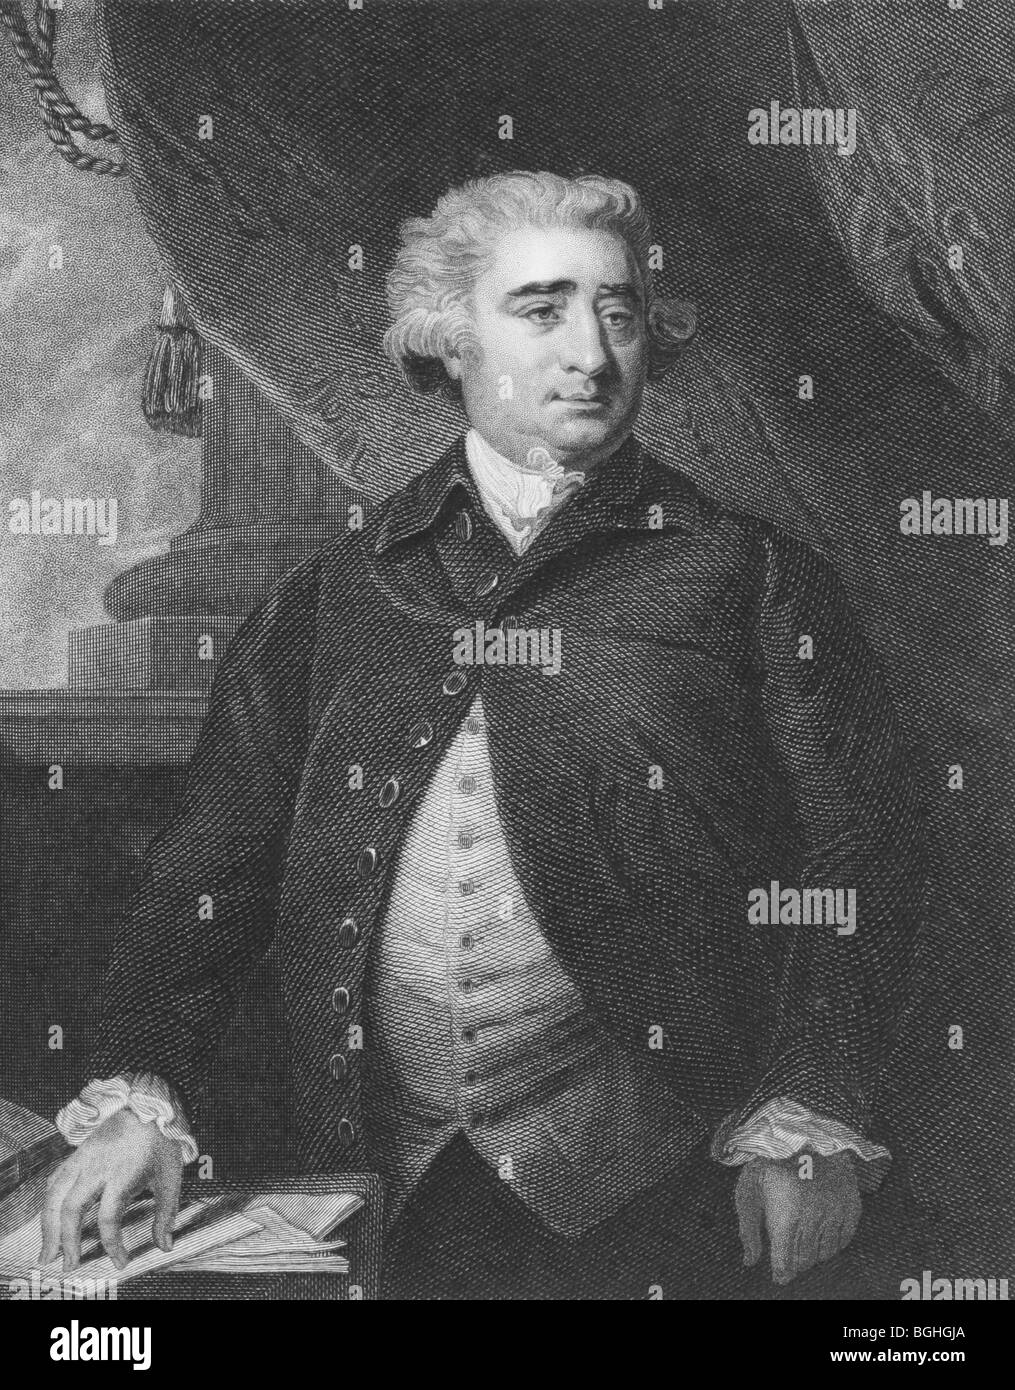 Charles James Fox on engraving from the 1850s. Prominent British Whig statesman. Stock Photo